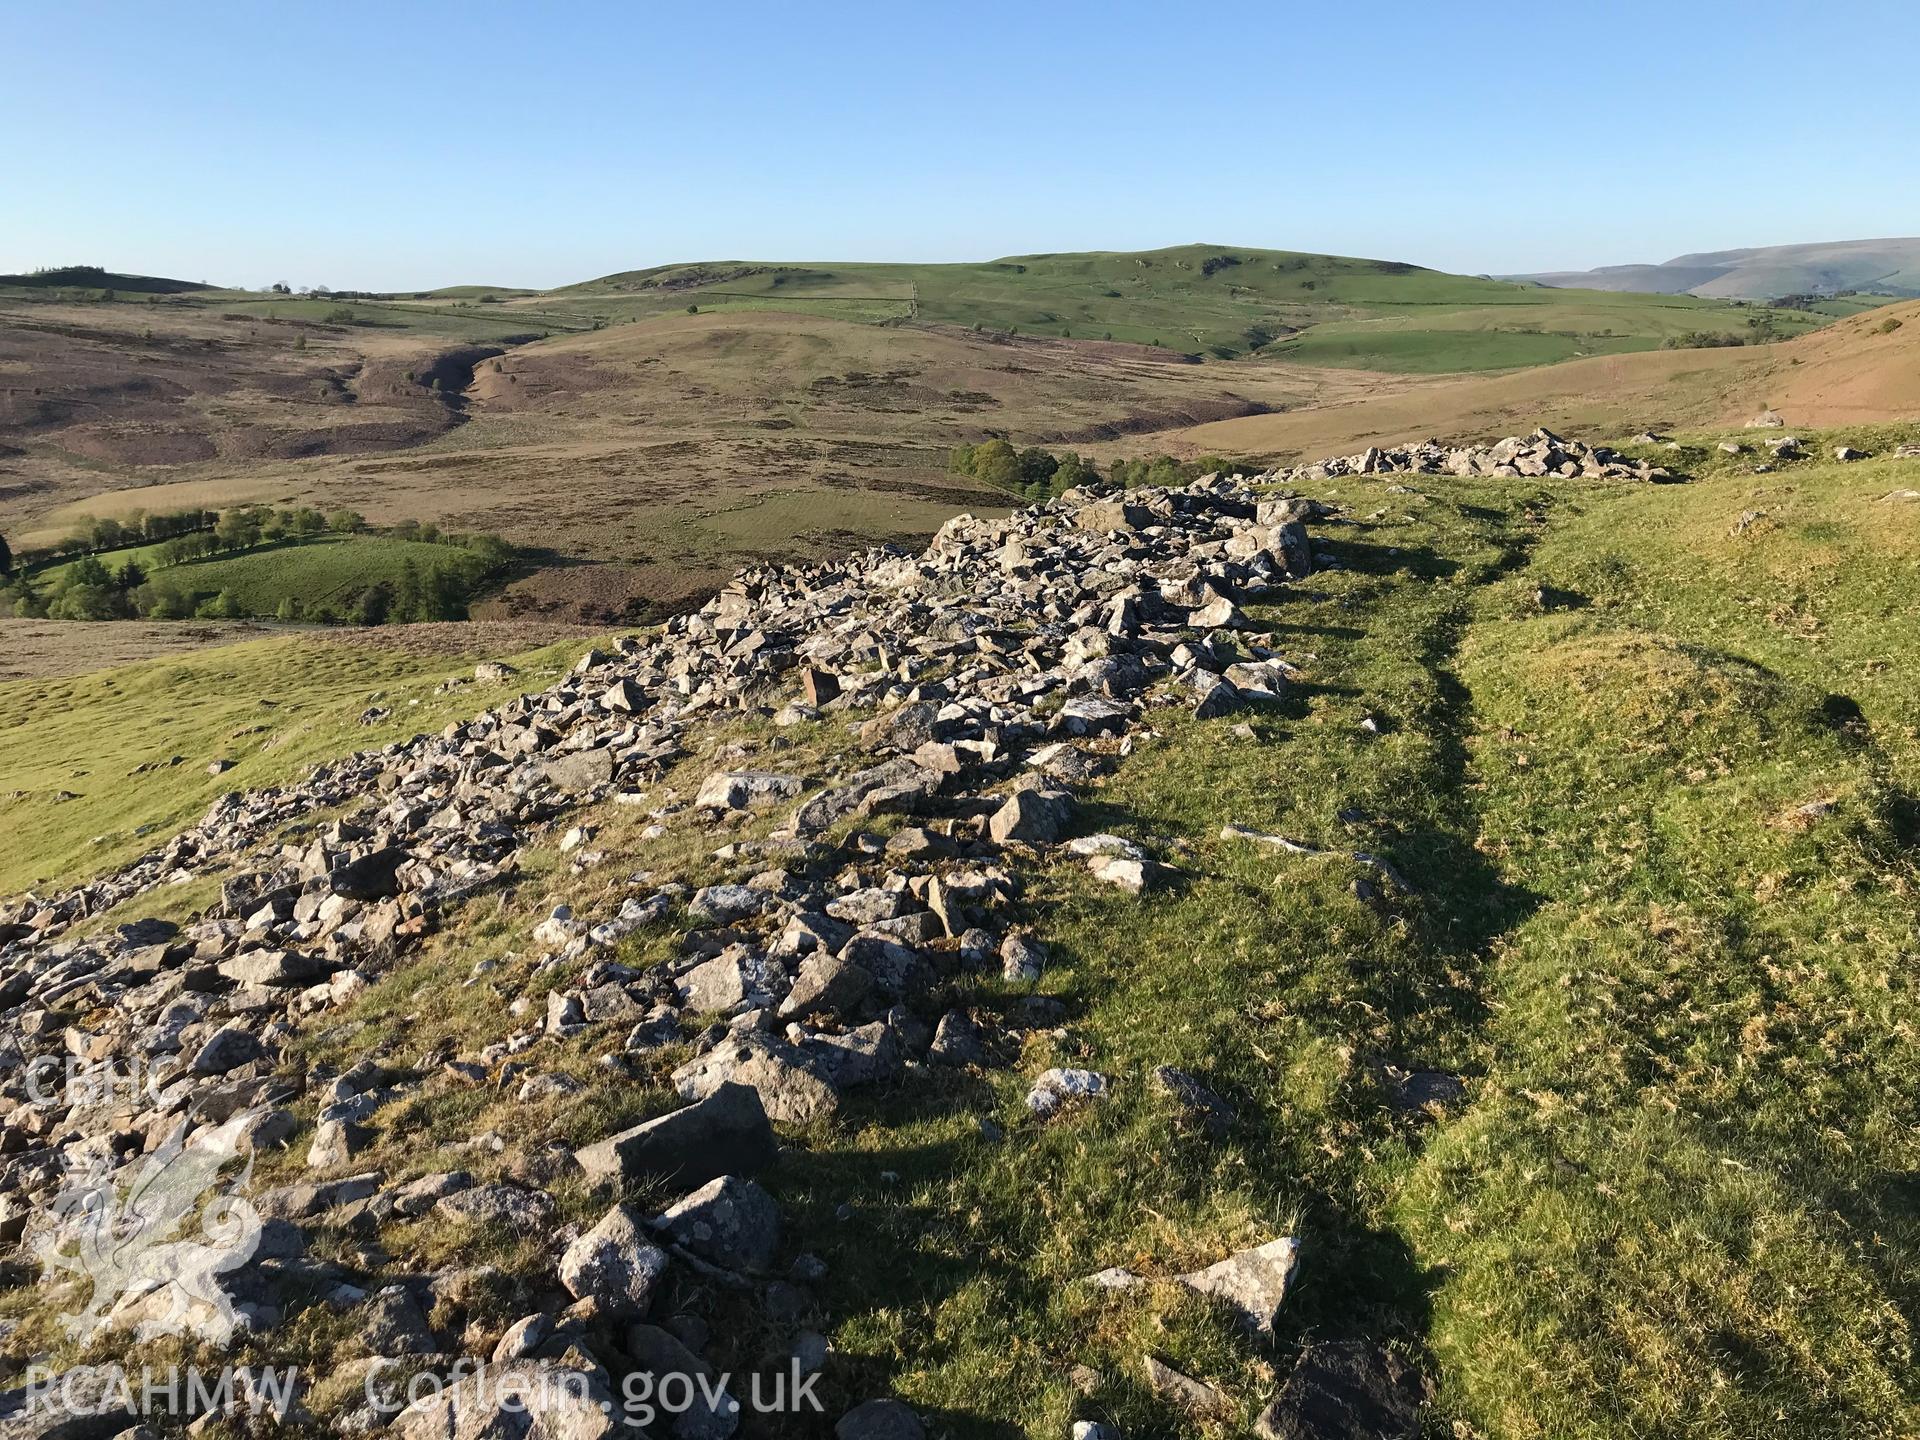 Colour photo showing detail of Castle Bank hillfort, Glasgwm, taken by Paul R. Davis, 13th May 2018.